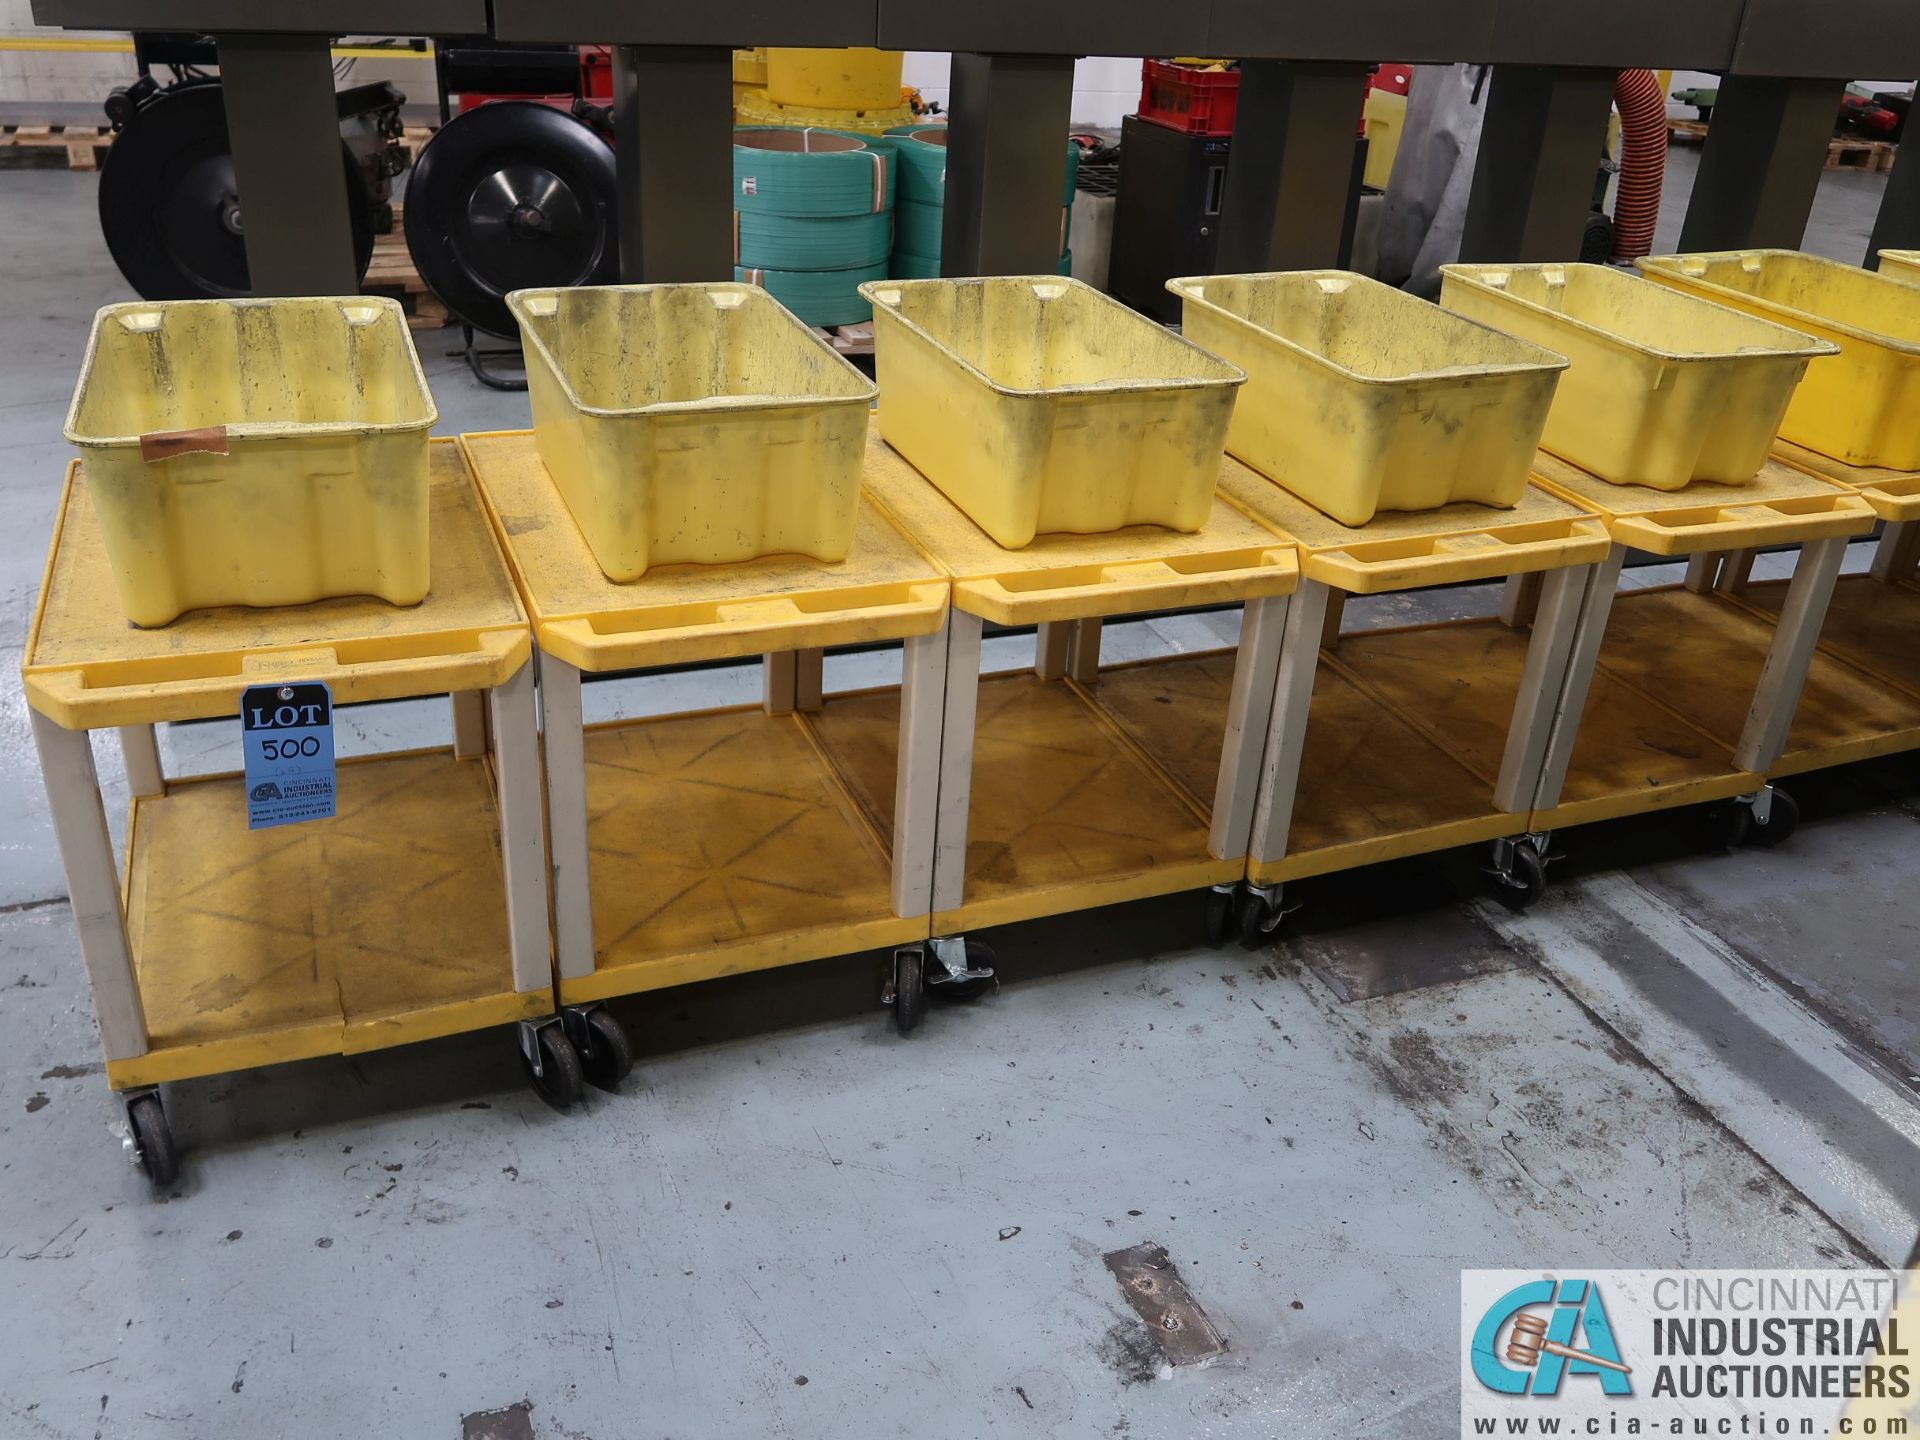 18" X 24" X 24" HIGH THE TUFFY YELLOW UTILITY CARTS WITH MOUNTED PARTS TOTE